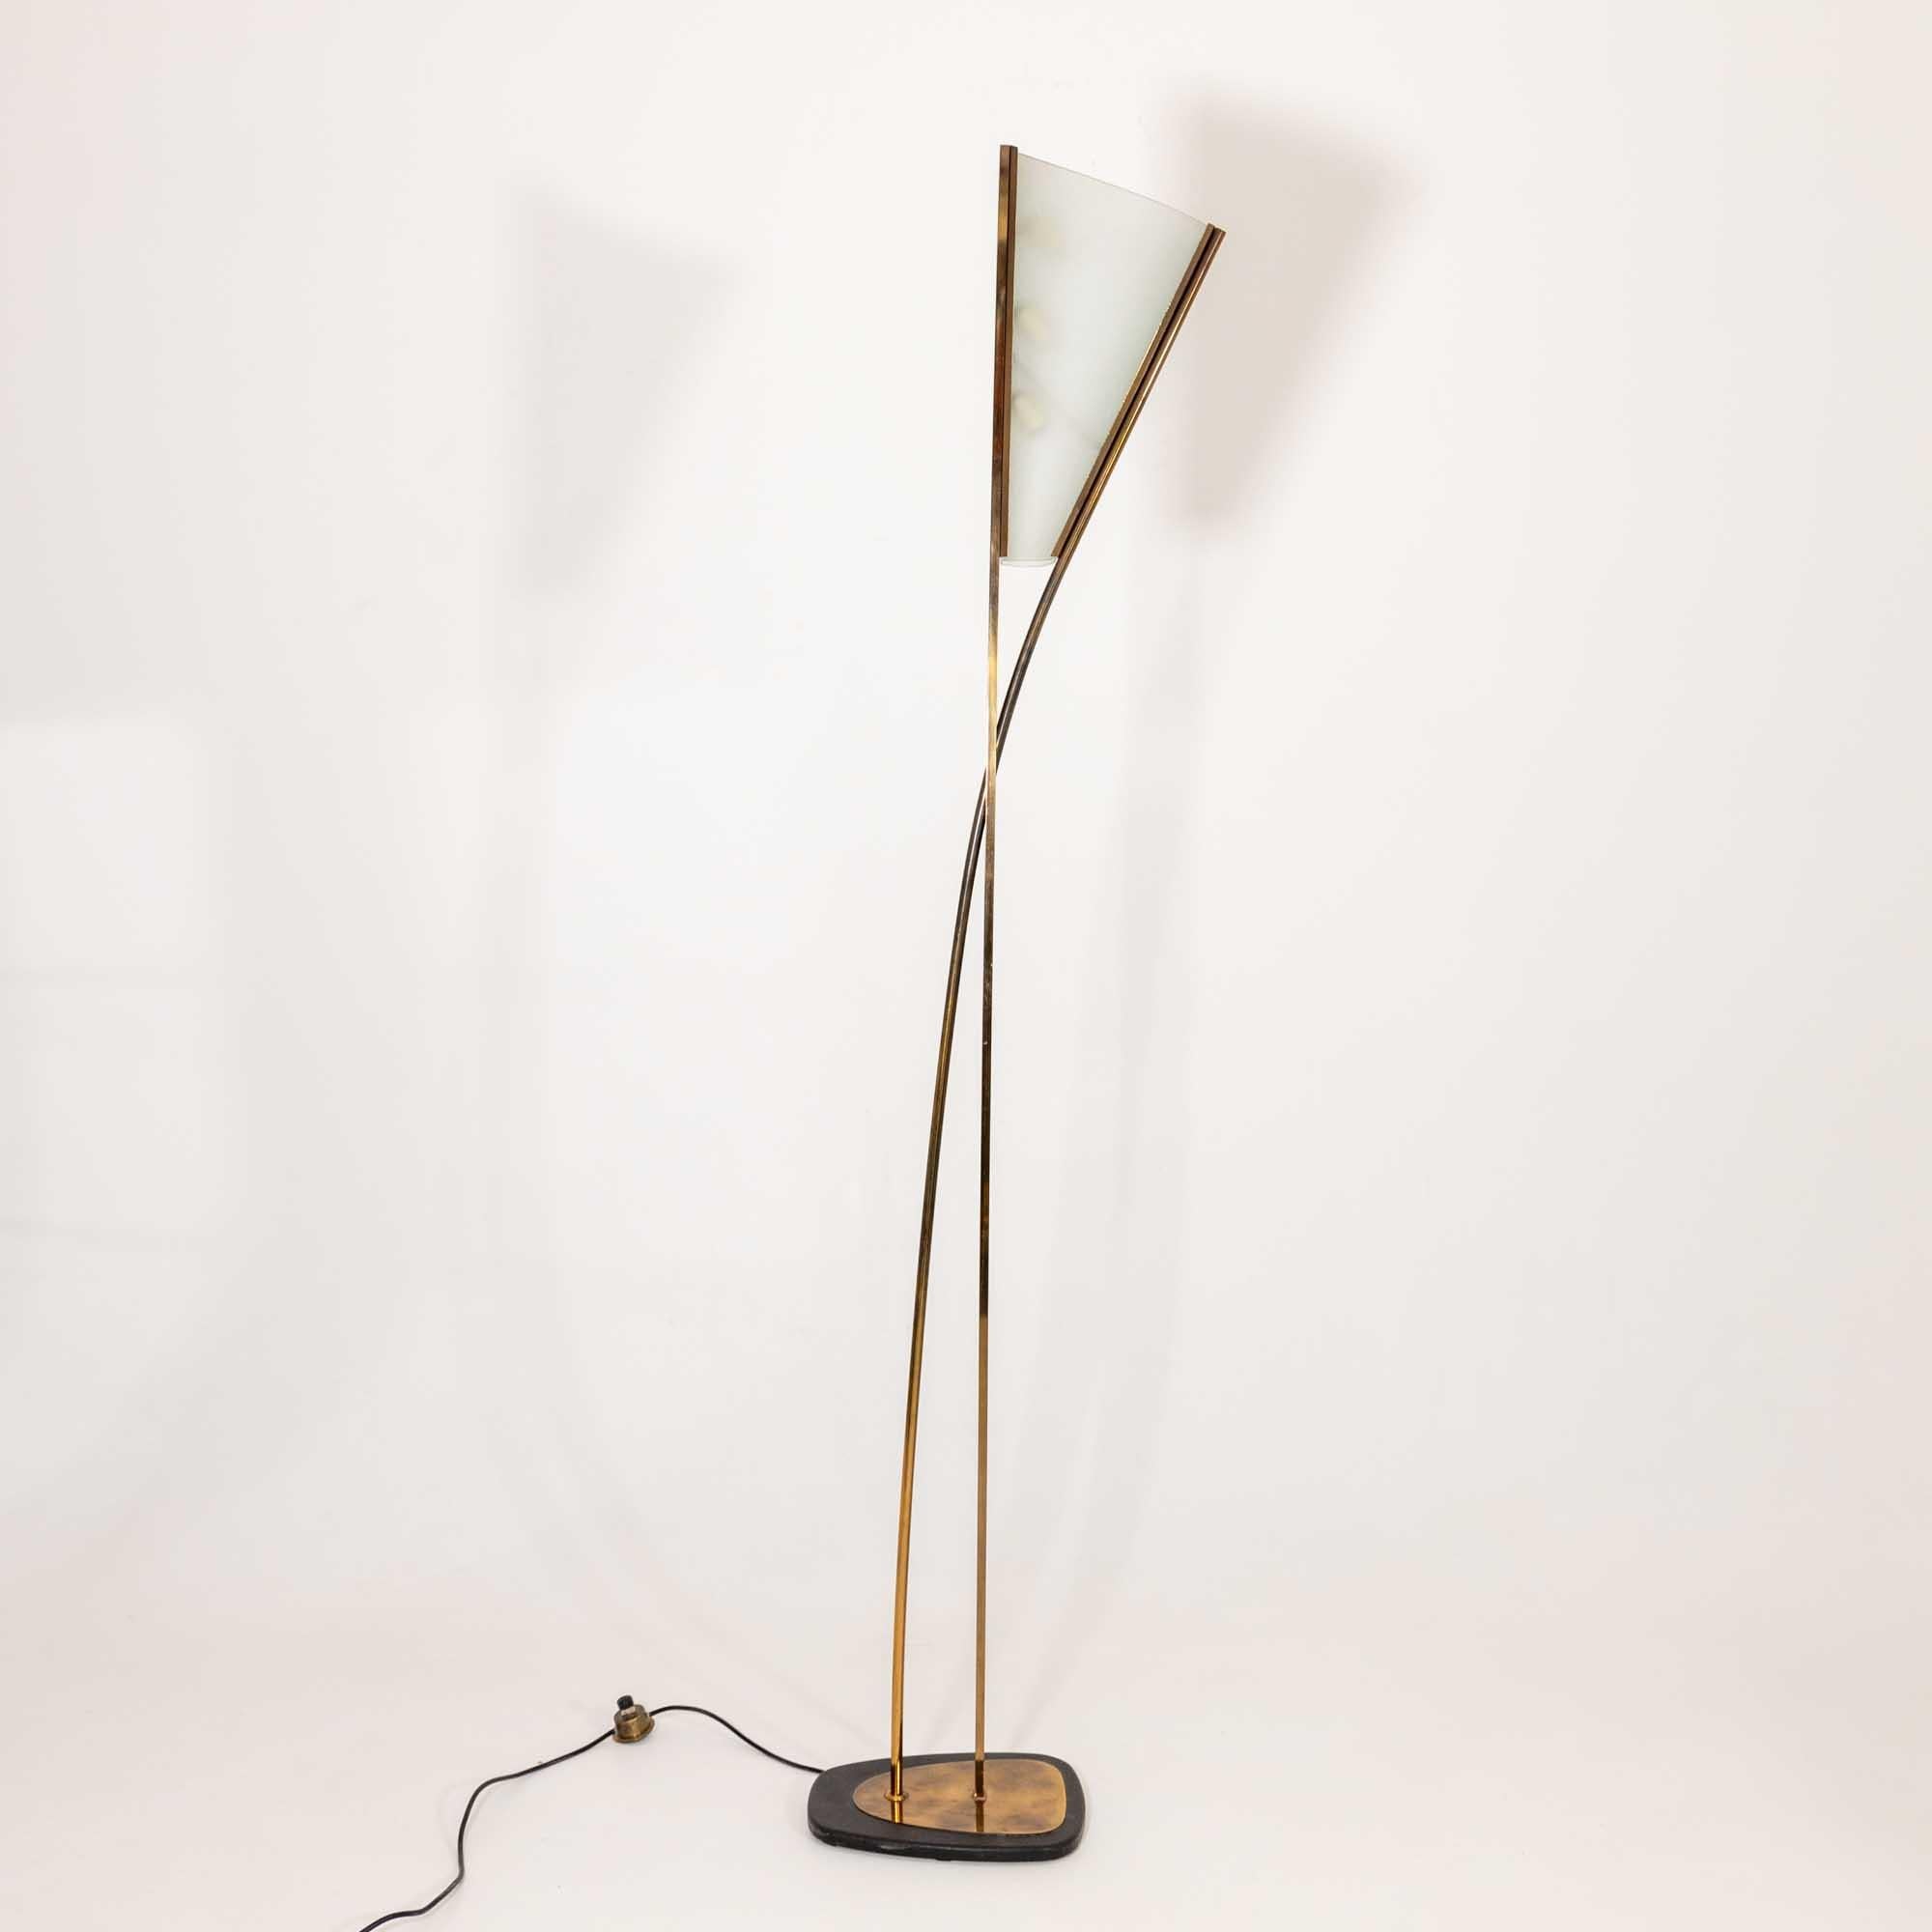 Single Italian Modernist Floor Lamp.

Vetical frosted glass difusers and patinated brass , resting on an ebonized metal base.